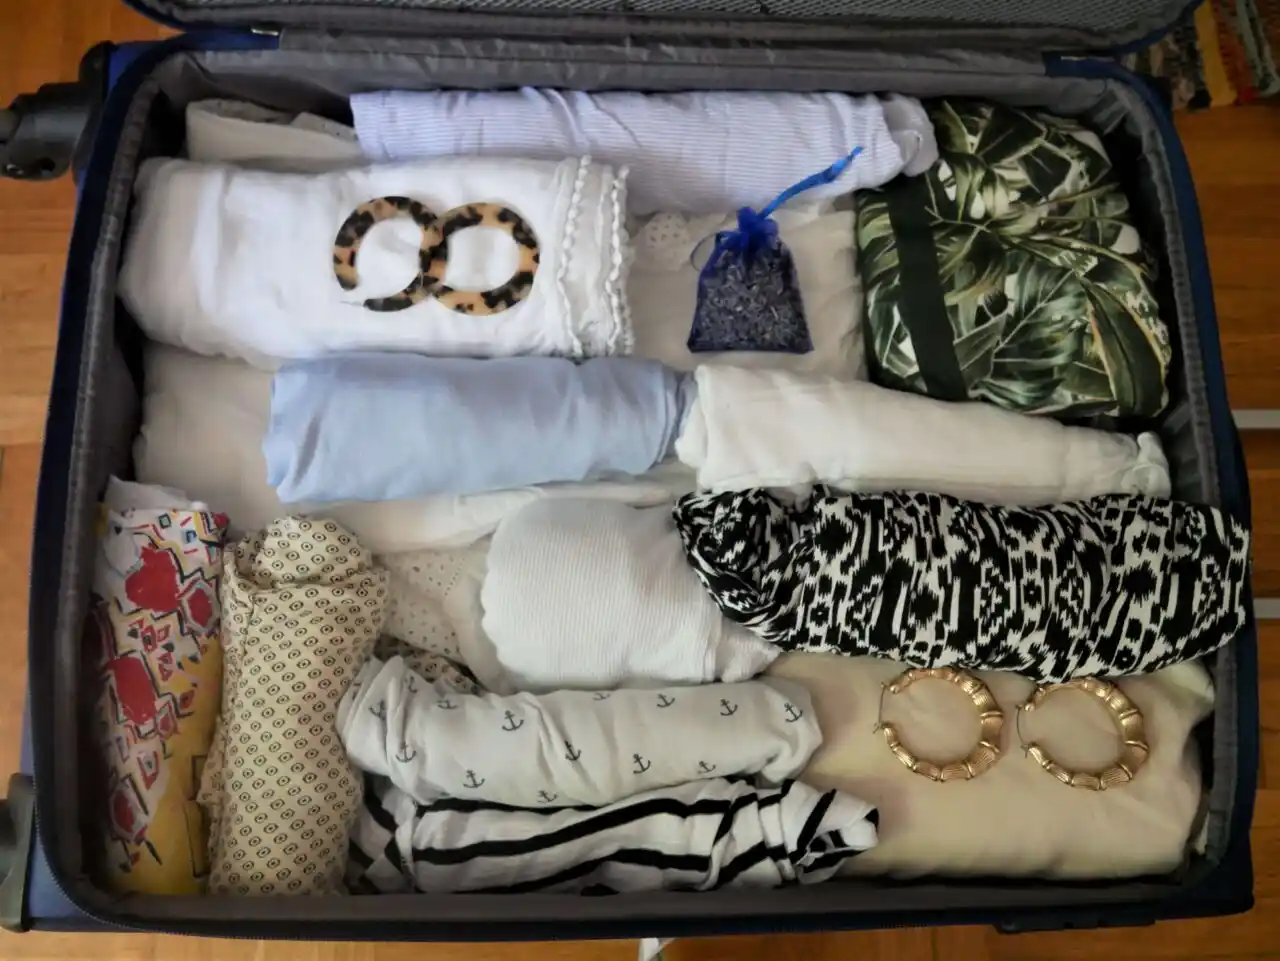 Rolling the clothes inside the suitcase